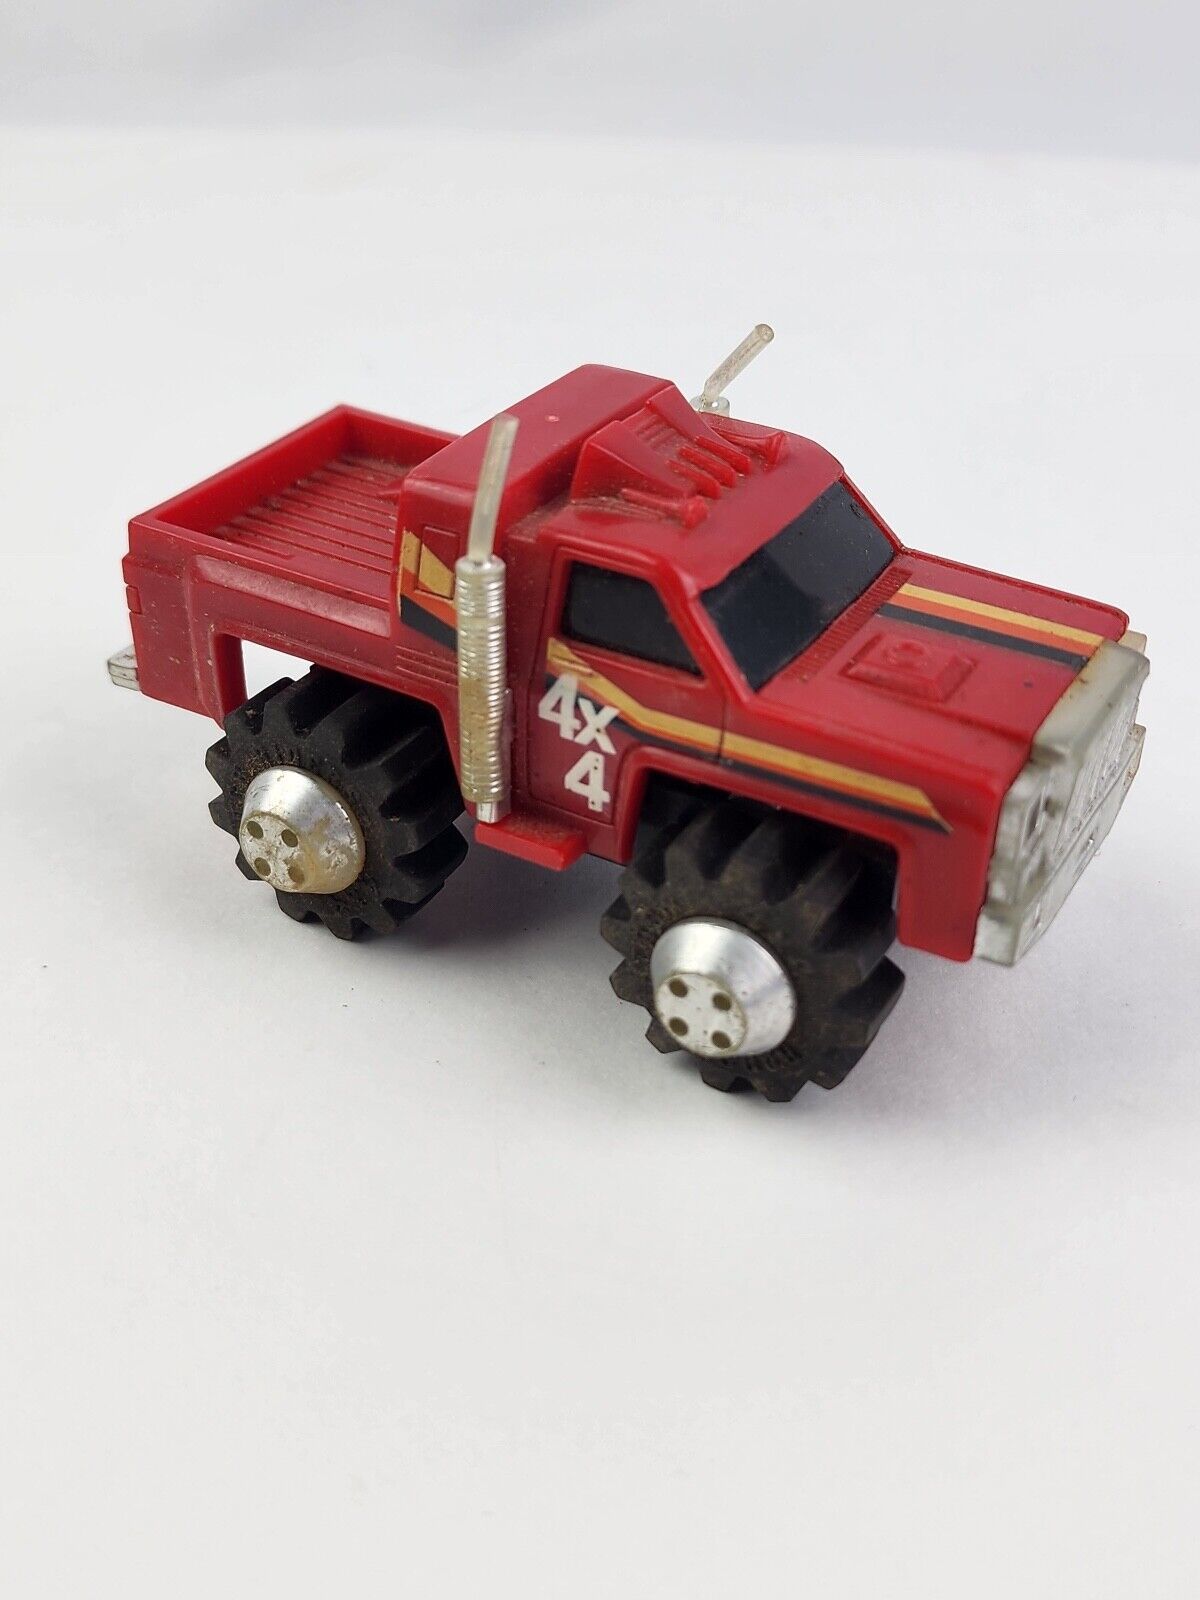 Primary image for Vintage Ljn Toys Rough Riders 4x4 Red Truck Tested & Working Stomper Style